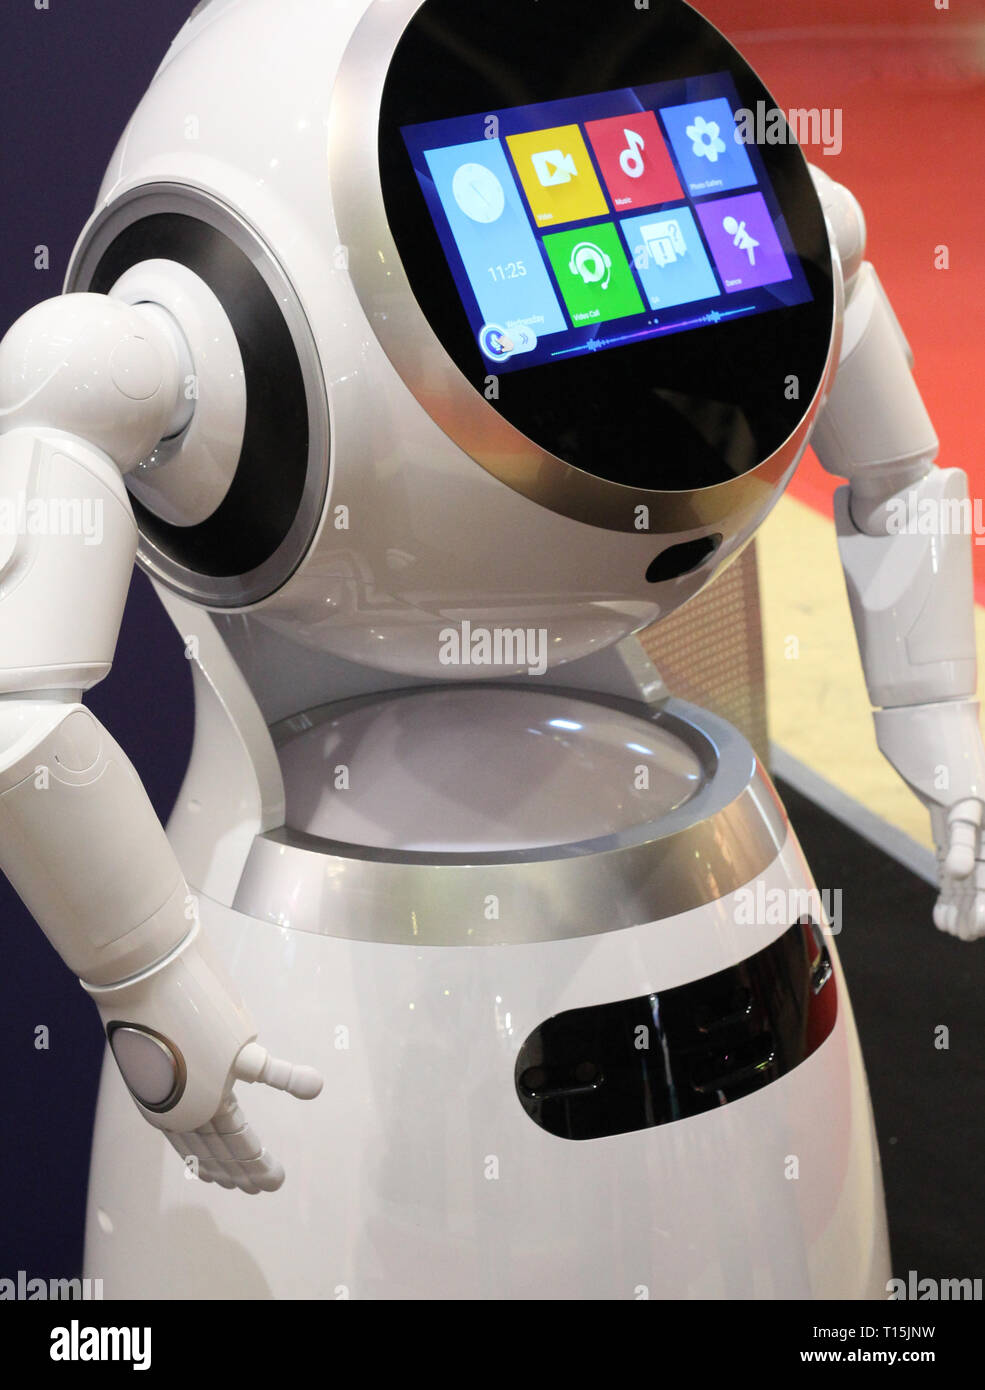 Smart robot for help around the house. Modern technologies for the development of robot assistants. Stock Photo